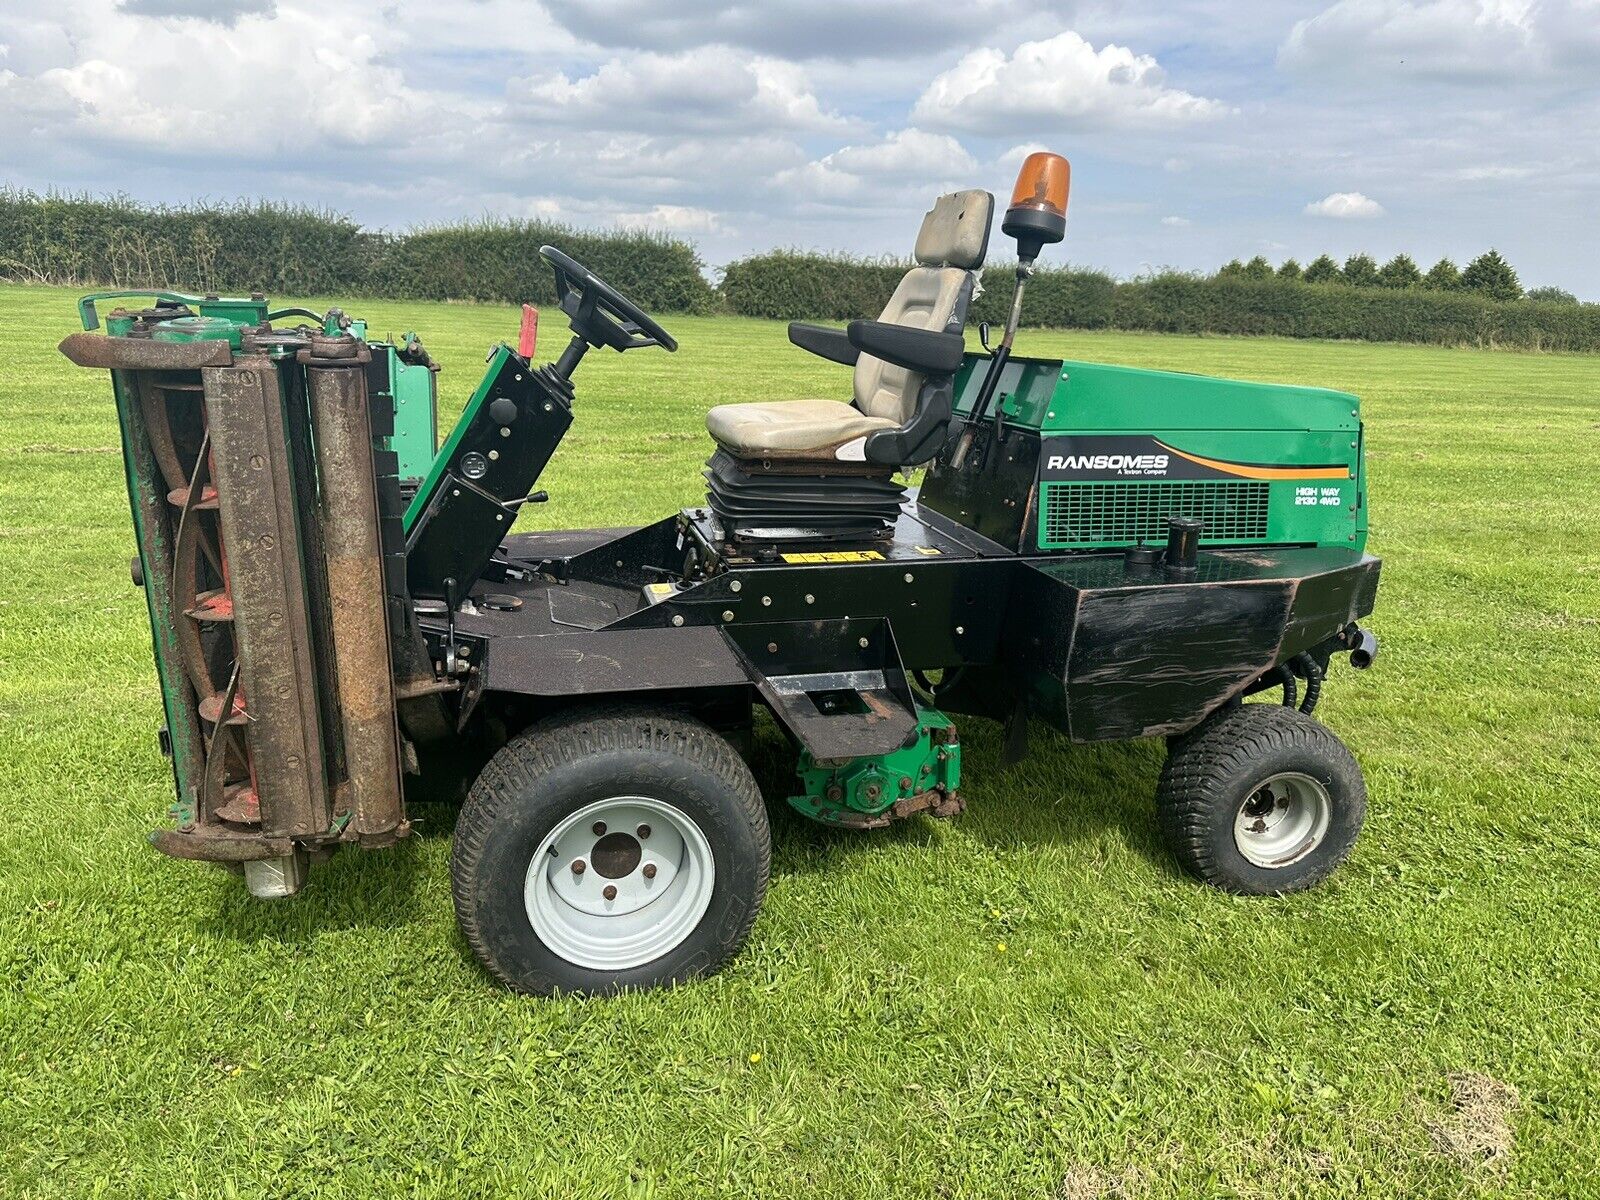 RANSOMES HIGHWAY 2130 TRIPLE CYLINDER RIDE SIT ON LAWN MOWER PARKWAY 1